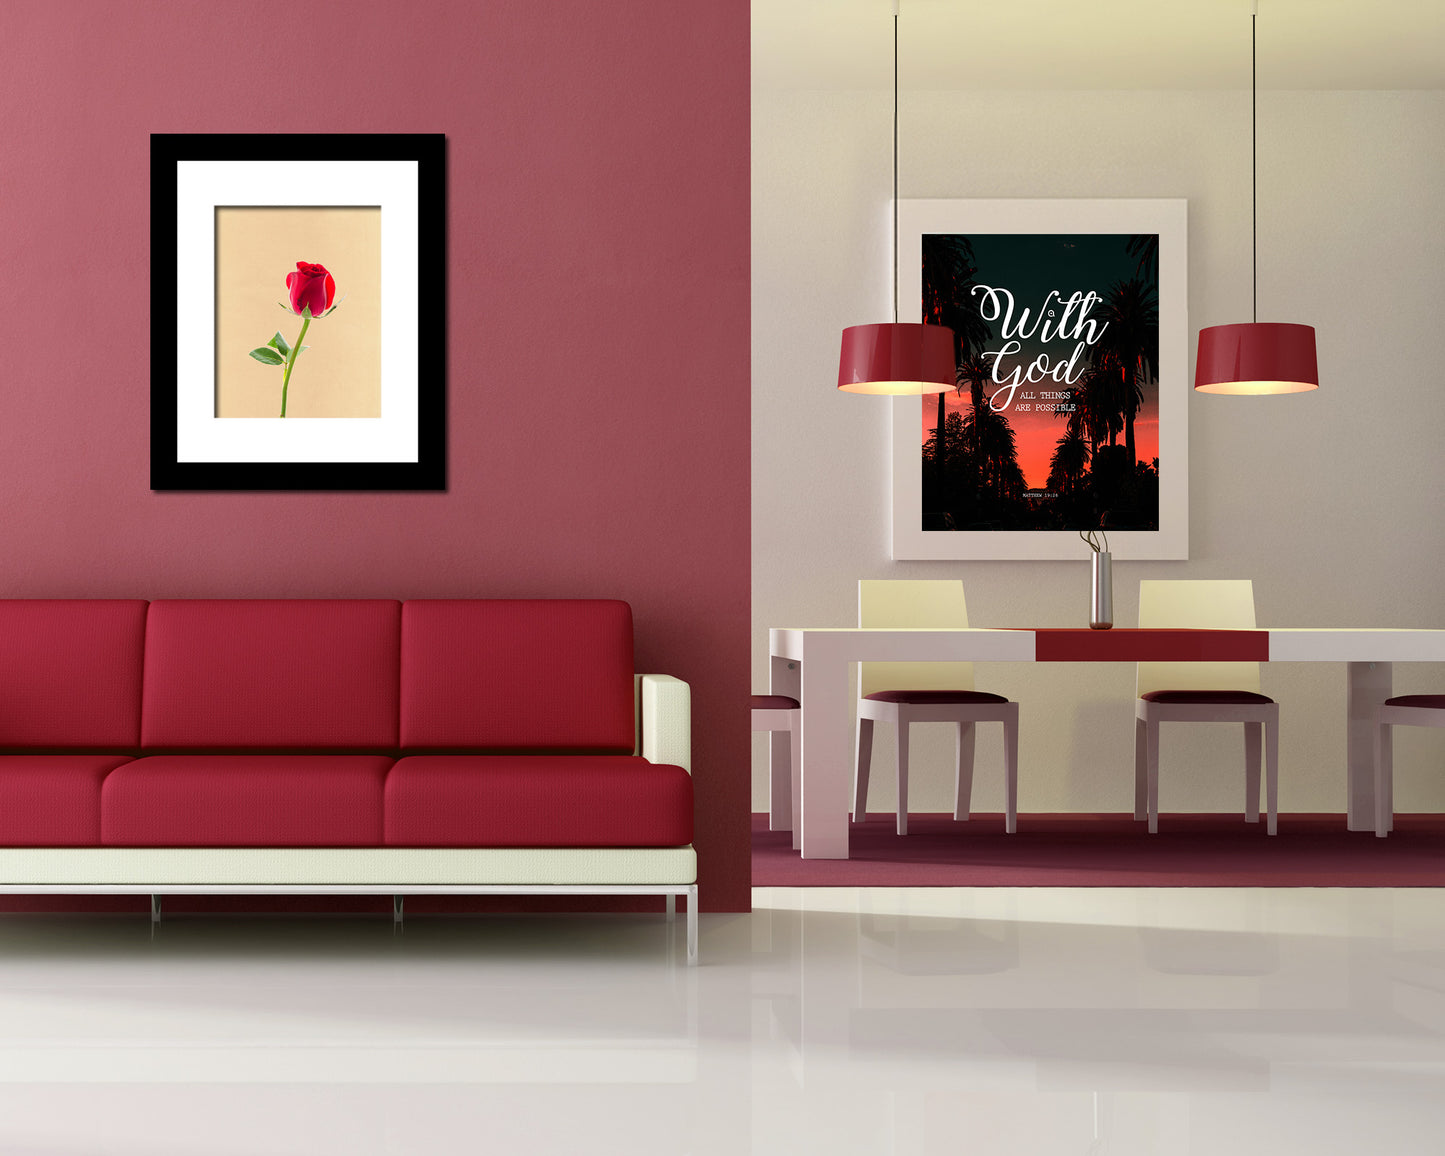 Red Rose Colorful Plants Art Wood Framed Print Wall Decor Gifts